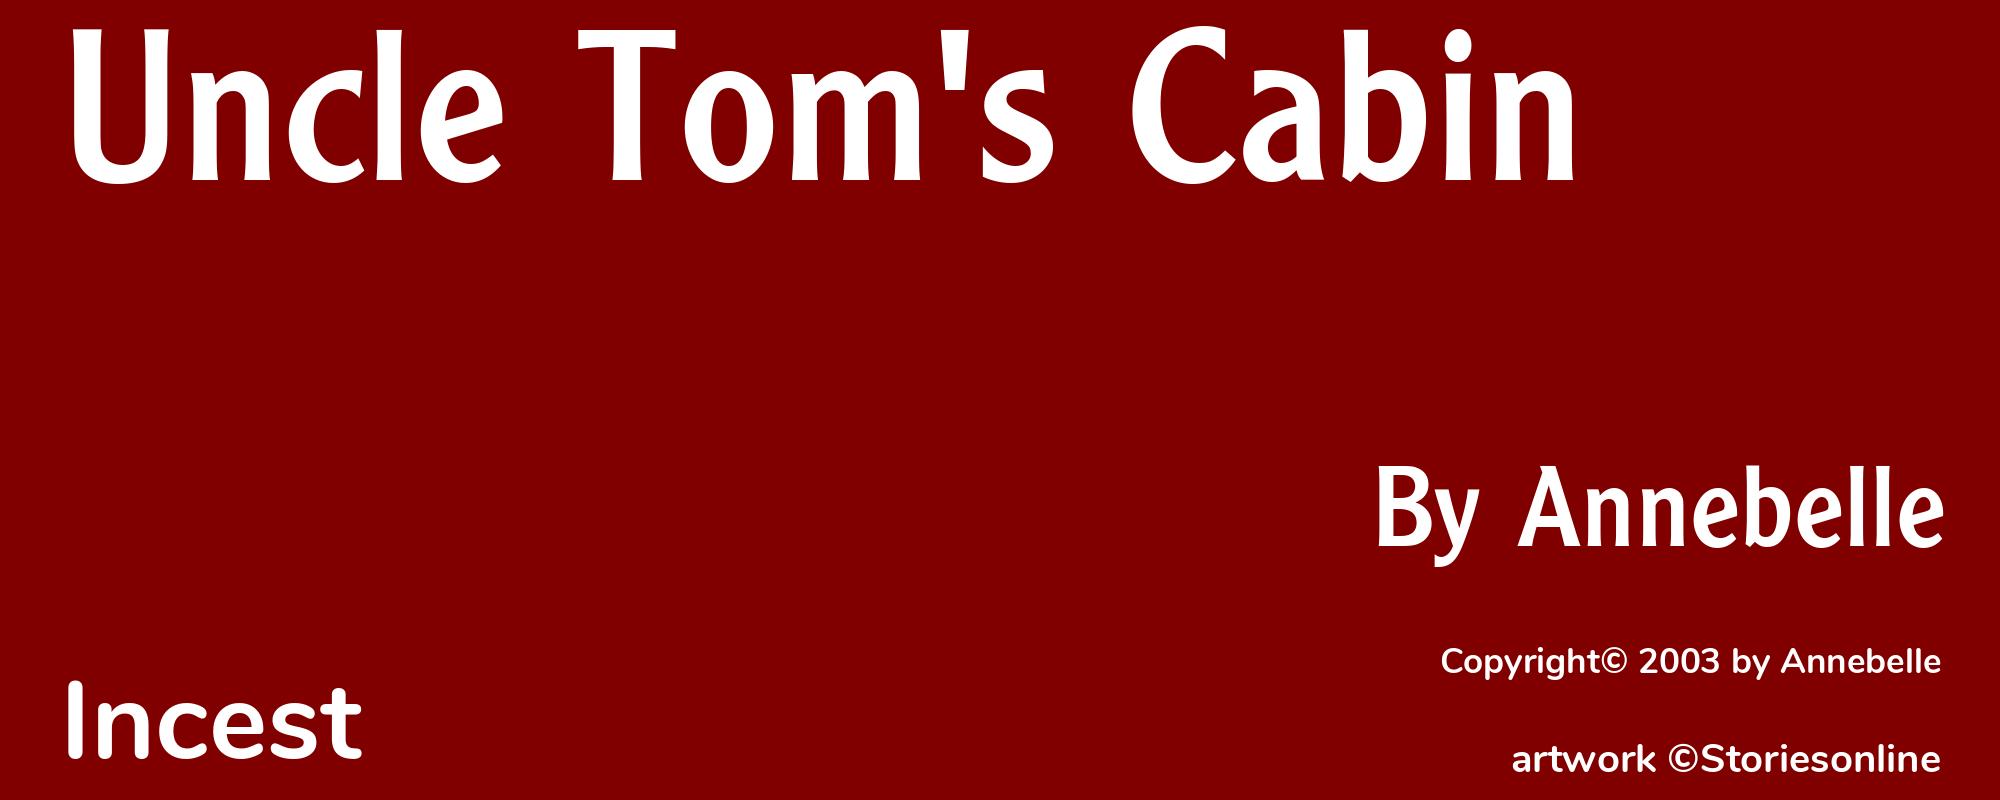 Uncle Tom's Cabin - Cover